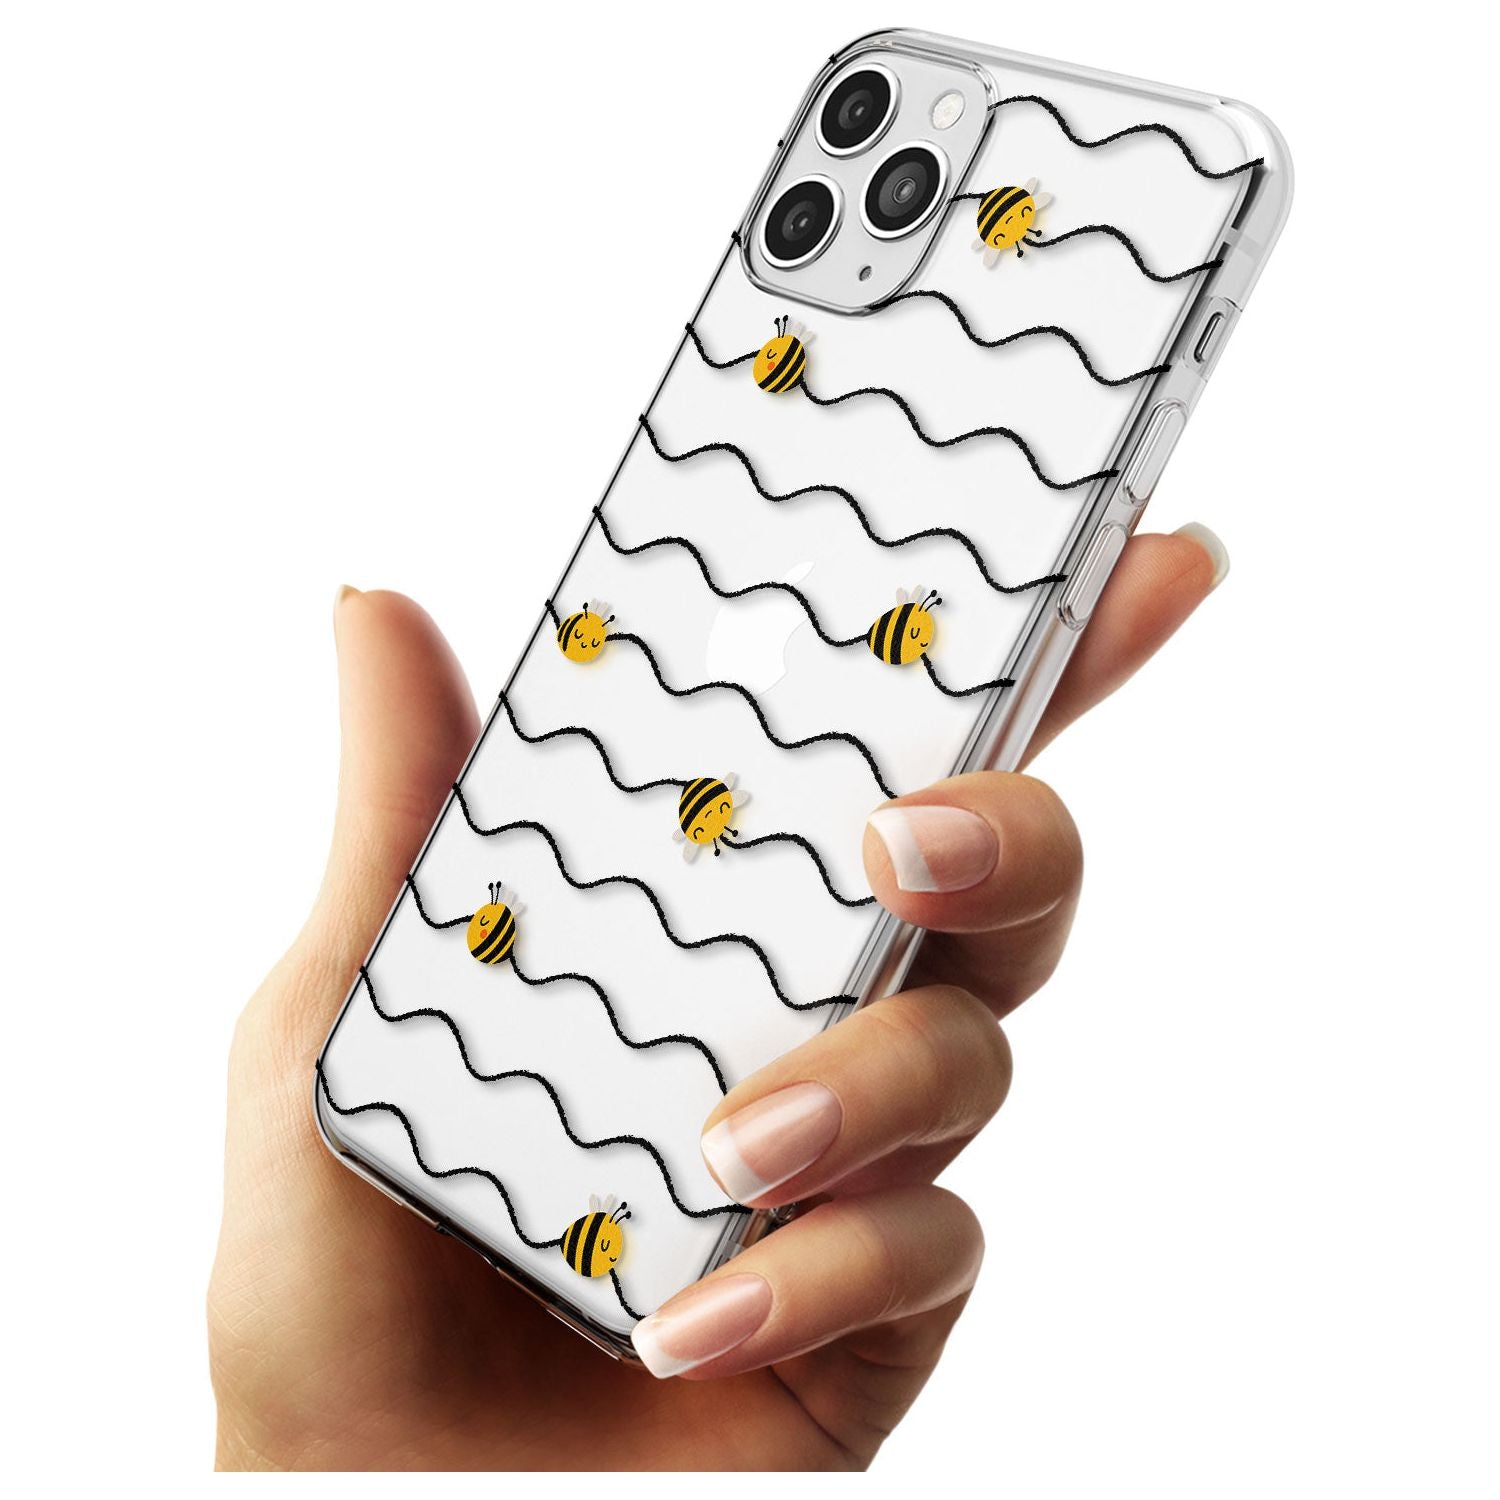 Sweet as Honey Patterns: Bees & Stripes (Clear) Slim TPU Phone Case for iPhone 11 Pro Max